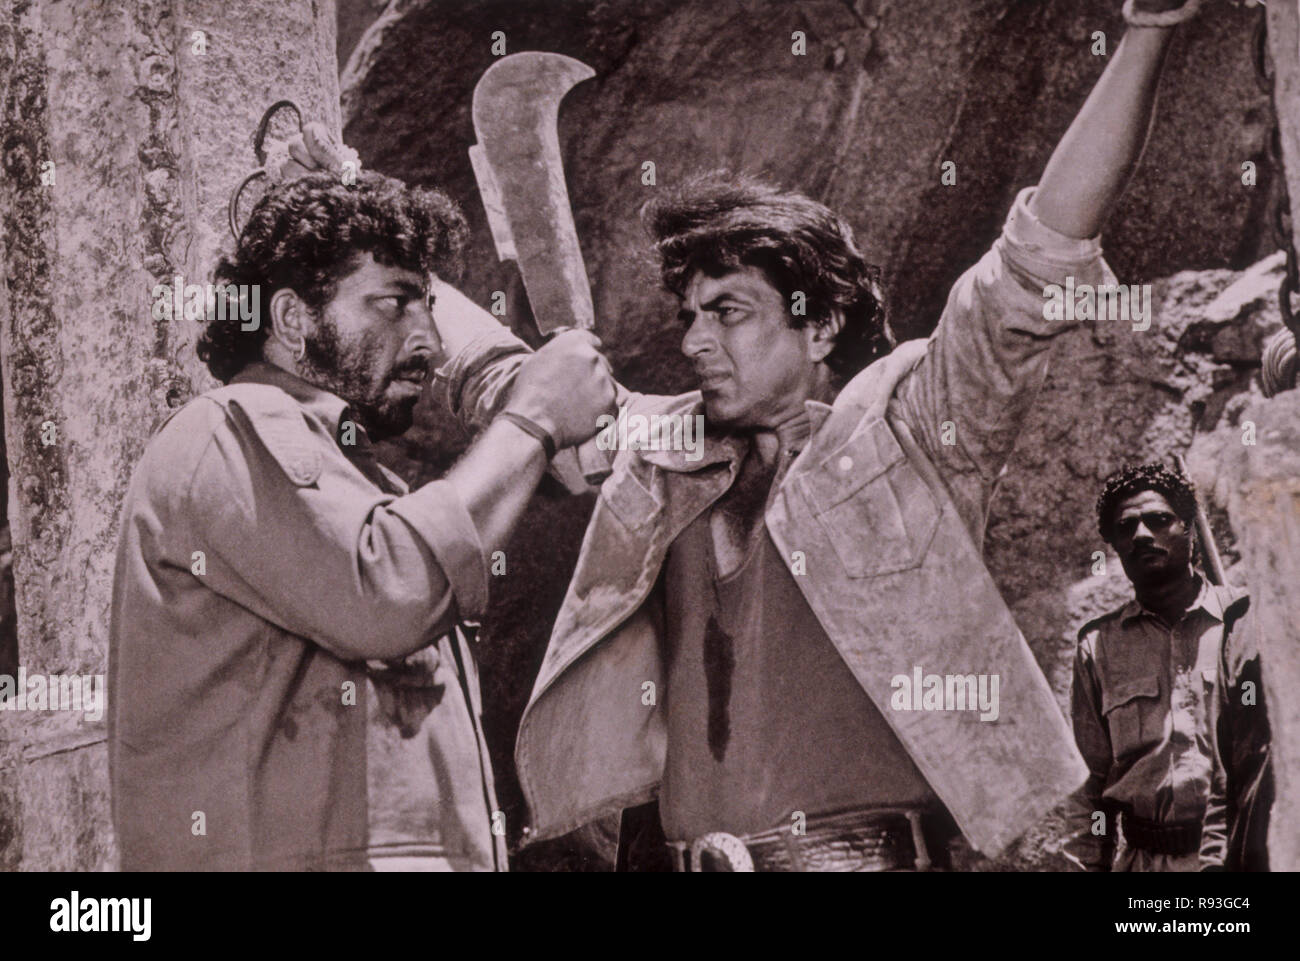 Amjad Khan and Dharmendra Indian bollywood movie actors in Hindi film Sholay, India, Asia, Indian, Asian, old vintage 1900s picture Stock Photo